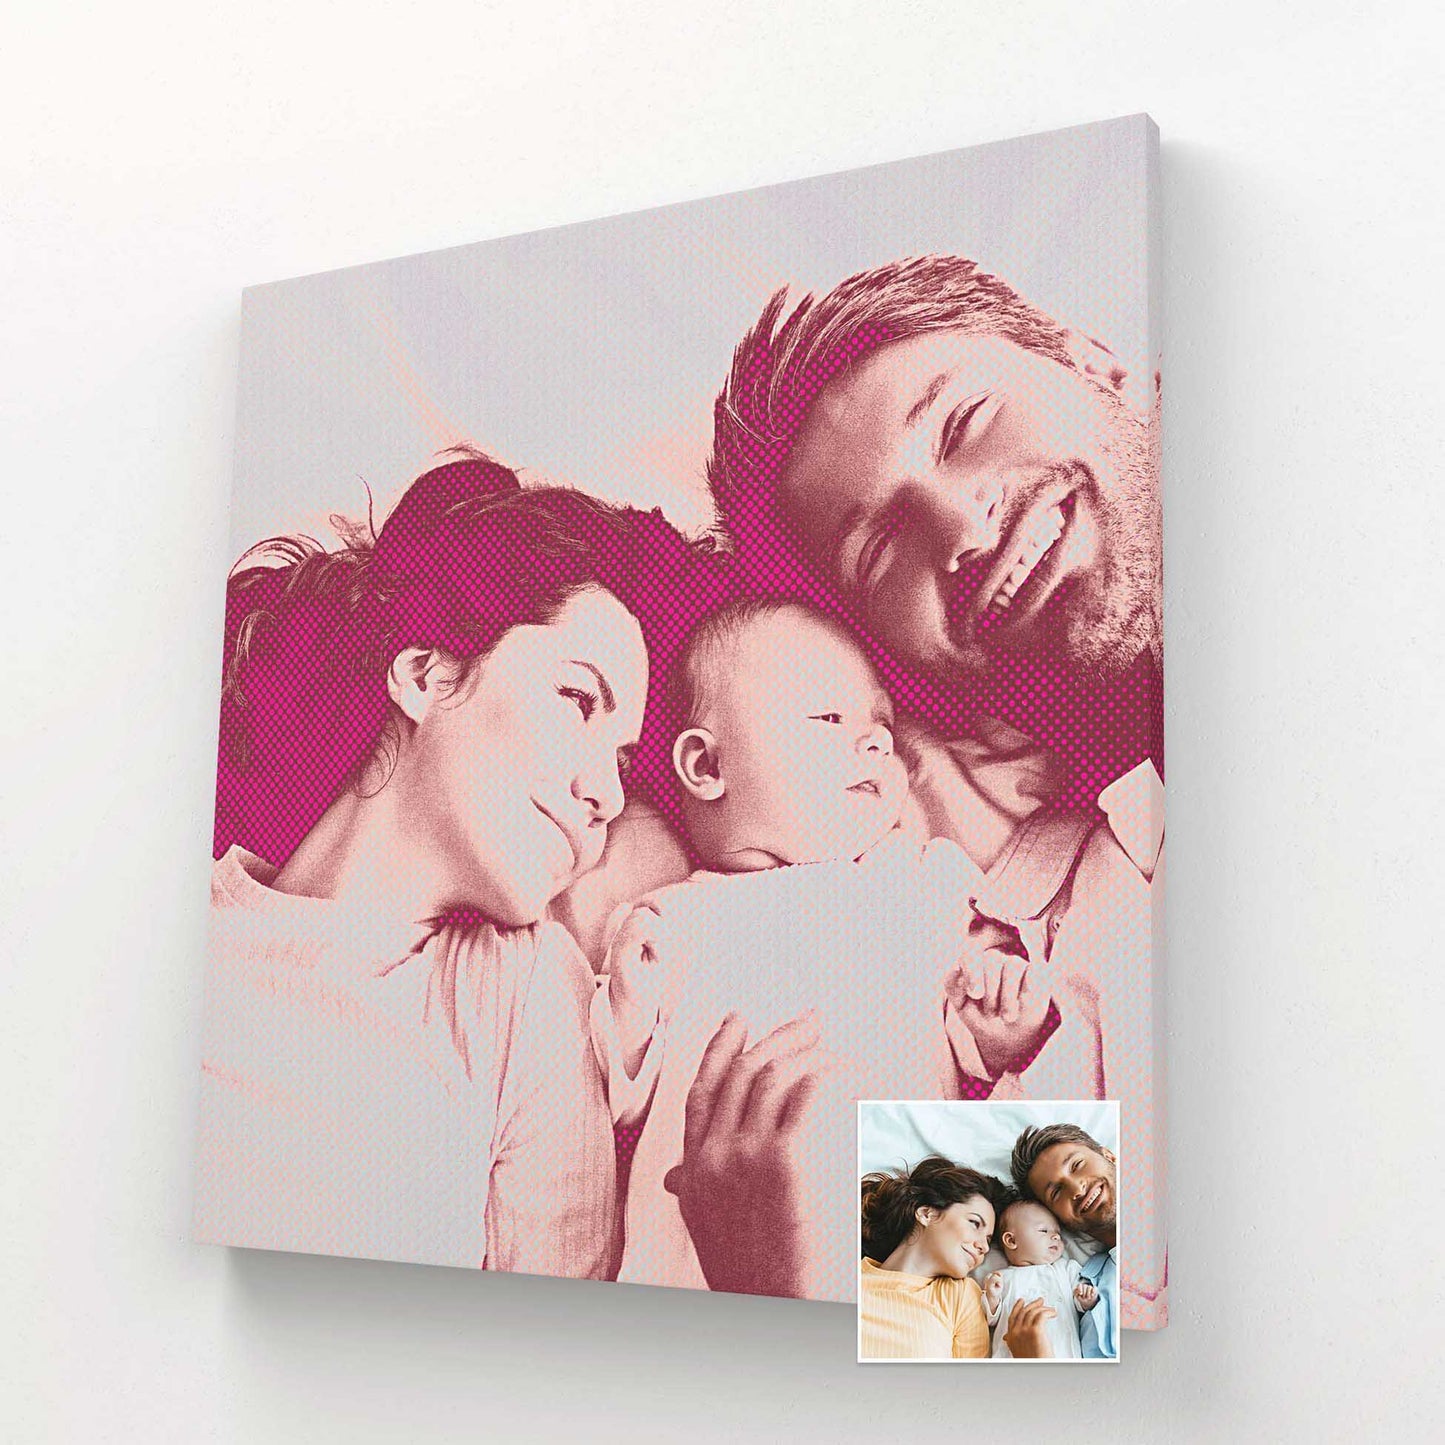 Add a touch of artistic flair to your space with our Personalised Pink Pop Art Canvas. Vibrant and bright, it's the epitome of cool and trendy decor. With a unique halftone texture and print from your photo, bespoke handmade canvas 